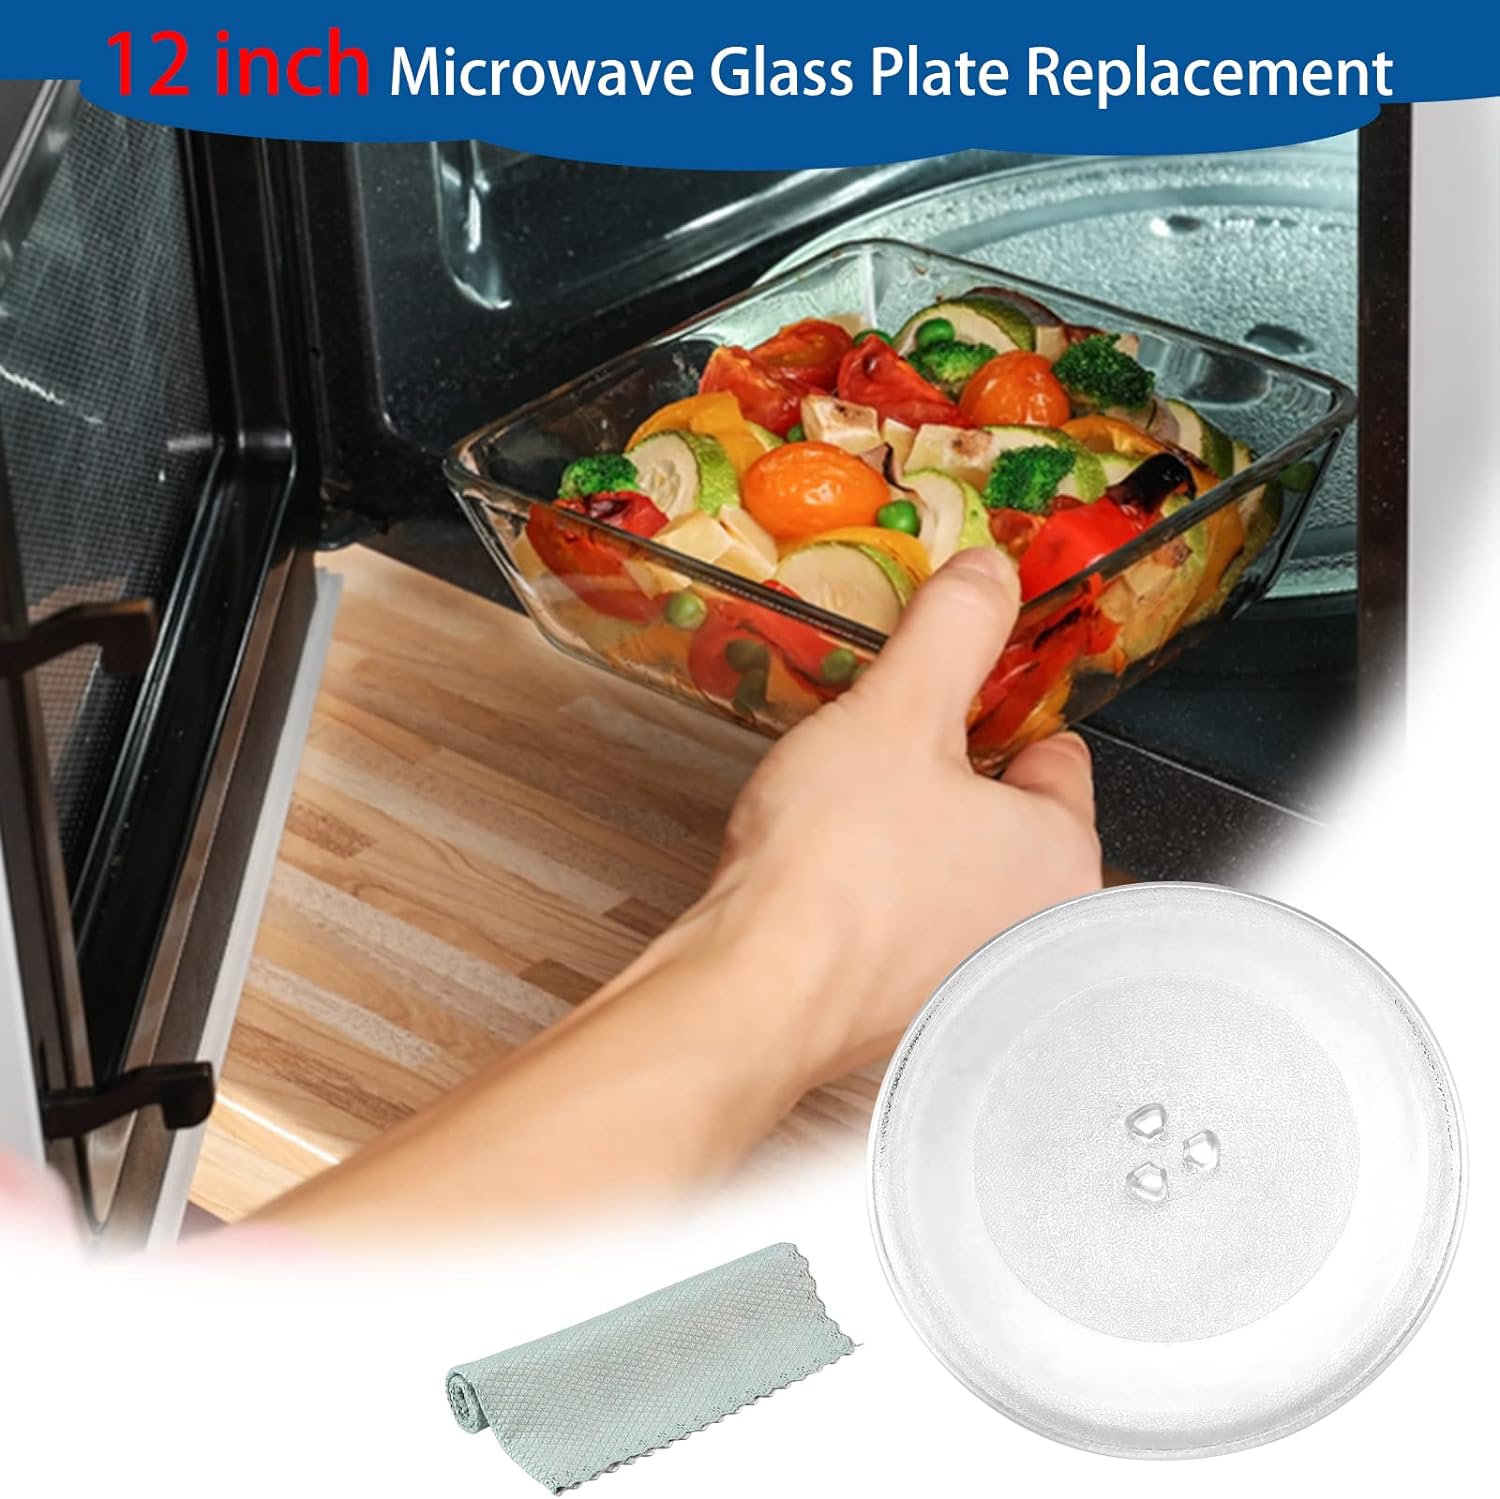 Fetechmate 12" Microwave Glass Plate Replacement W10337247 Glass Turntable Tray for whirl.pool Microwave replace W11291538 W11367904